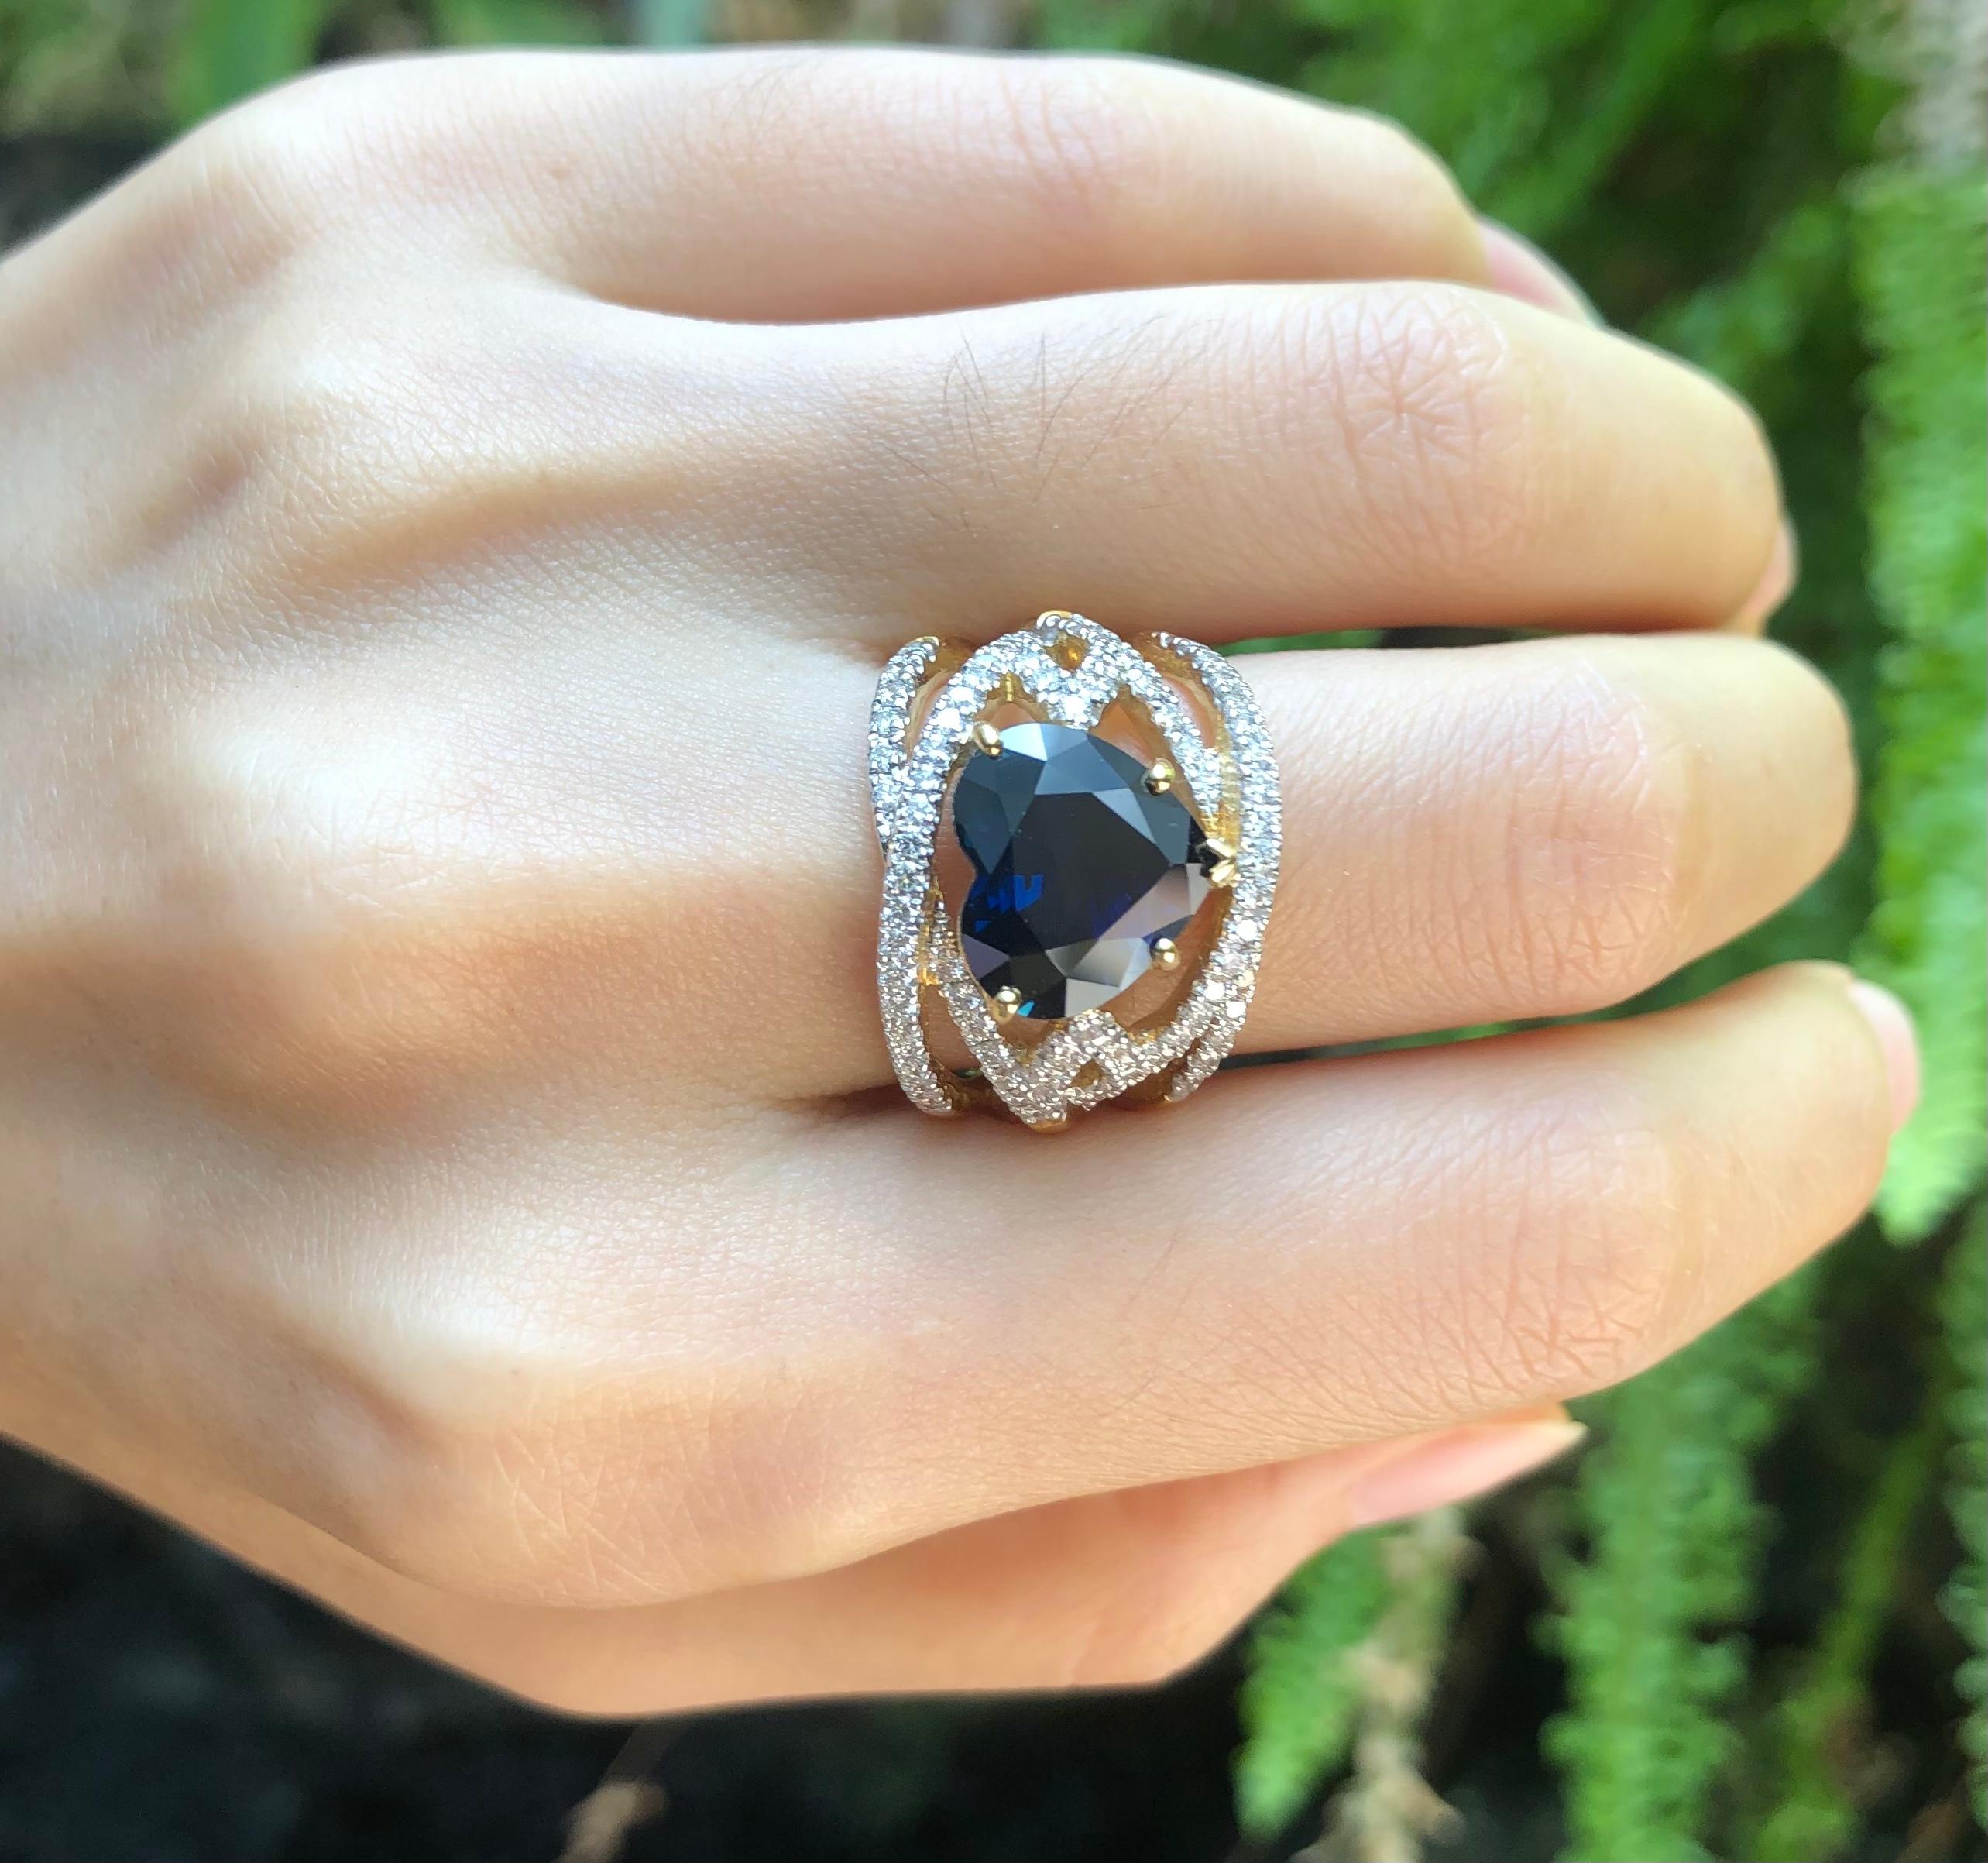 Blue Sapphire 5.64 carats with Diamond 0.82 carat Ring set in 18 Karat Gold Settings

Width:  1.1 cm 
Length: 1.1 cm
Ring Size: 52
Total Weight: 13.01 grams

